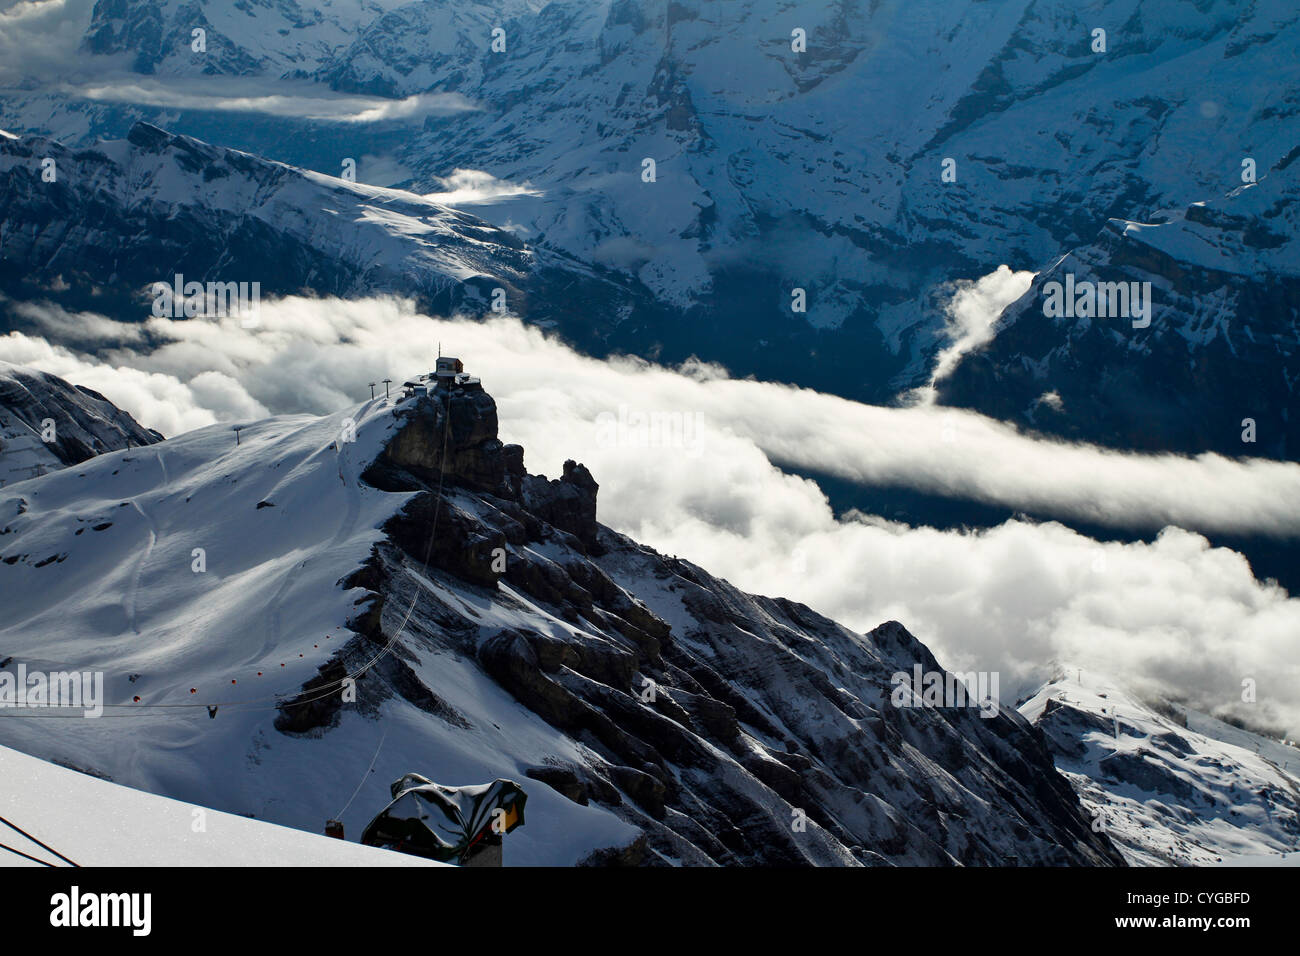 Cable car station at Birg. Swiss Alps, Berner Oberland. Viewed from Piz Gloria atop the Schilthorn Mountain. Stock Photo